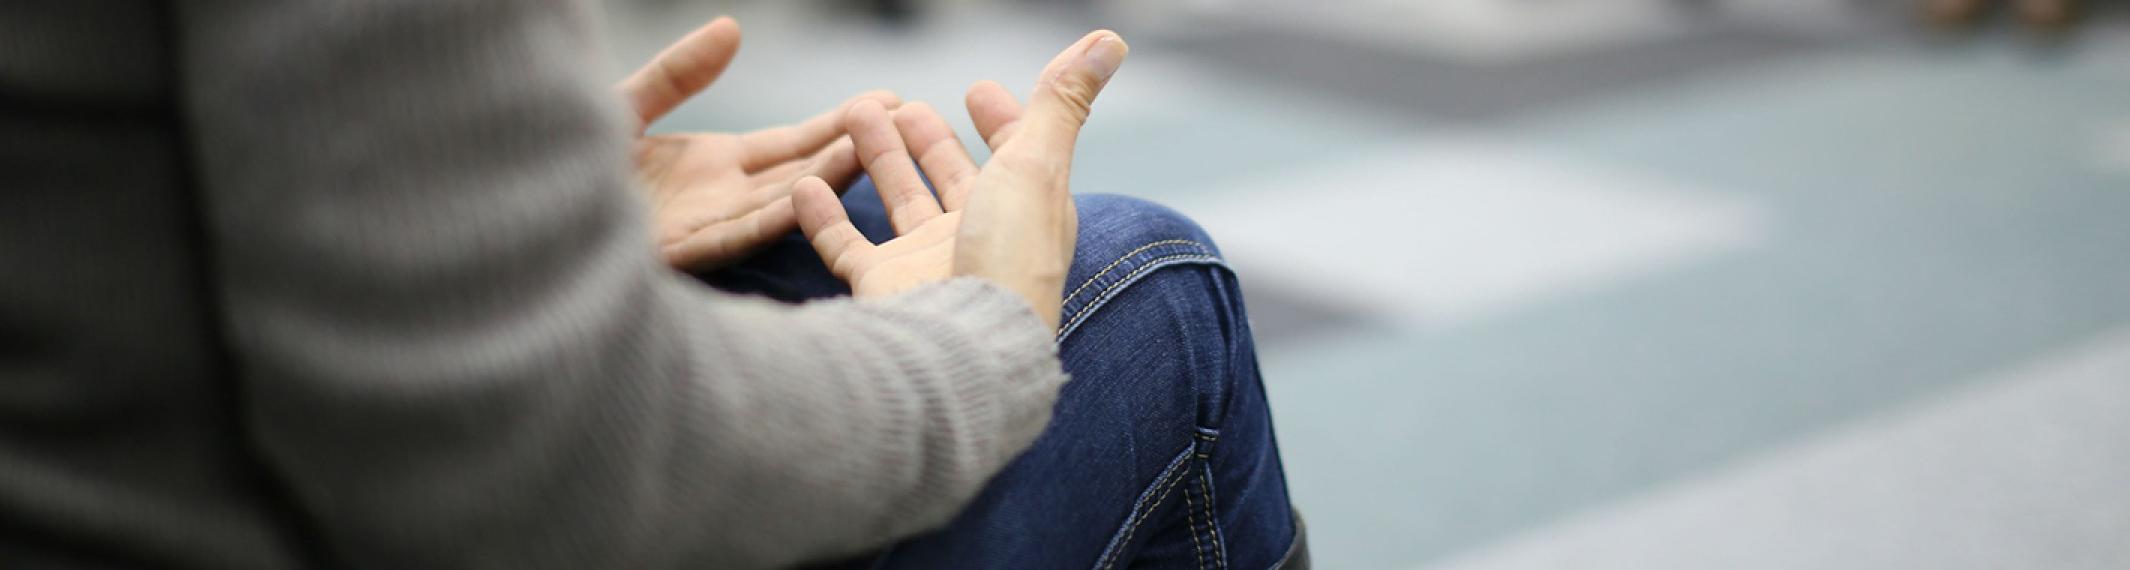 Closeup of a person's hands palm up on his lap as he talks during a group therapy session